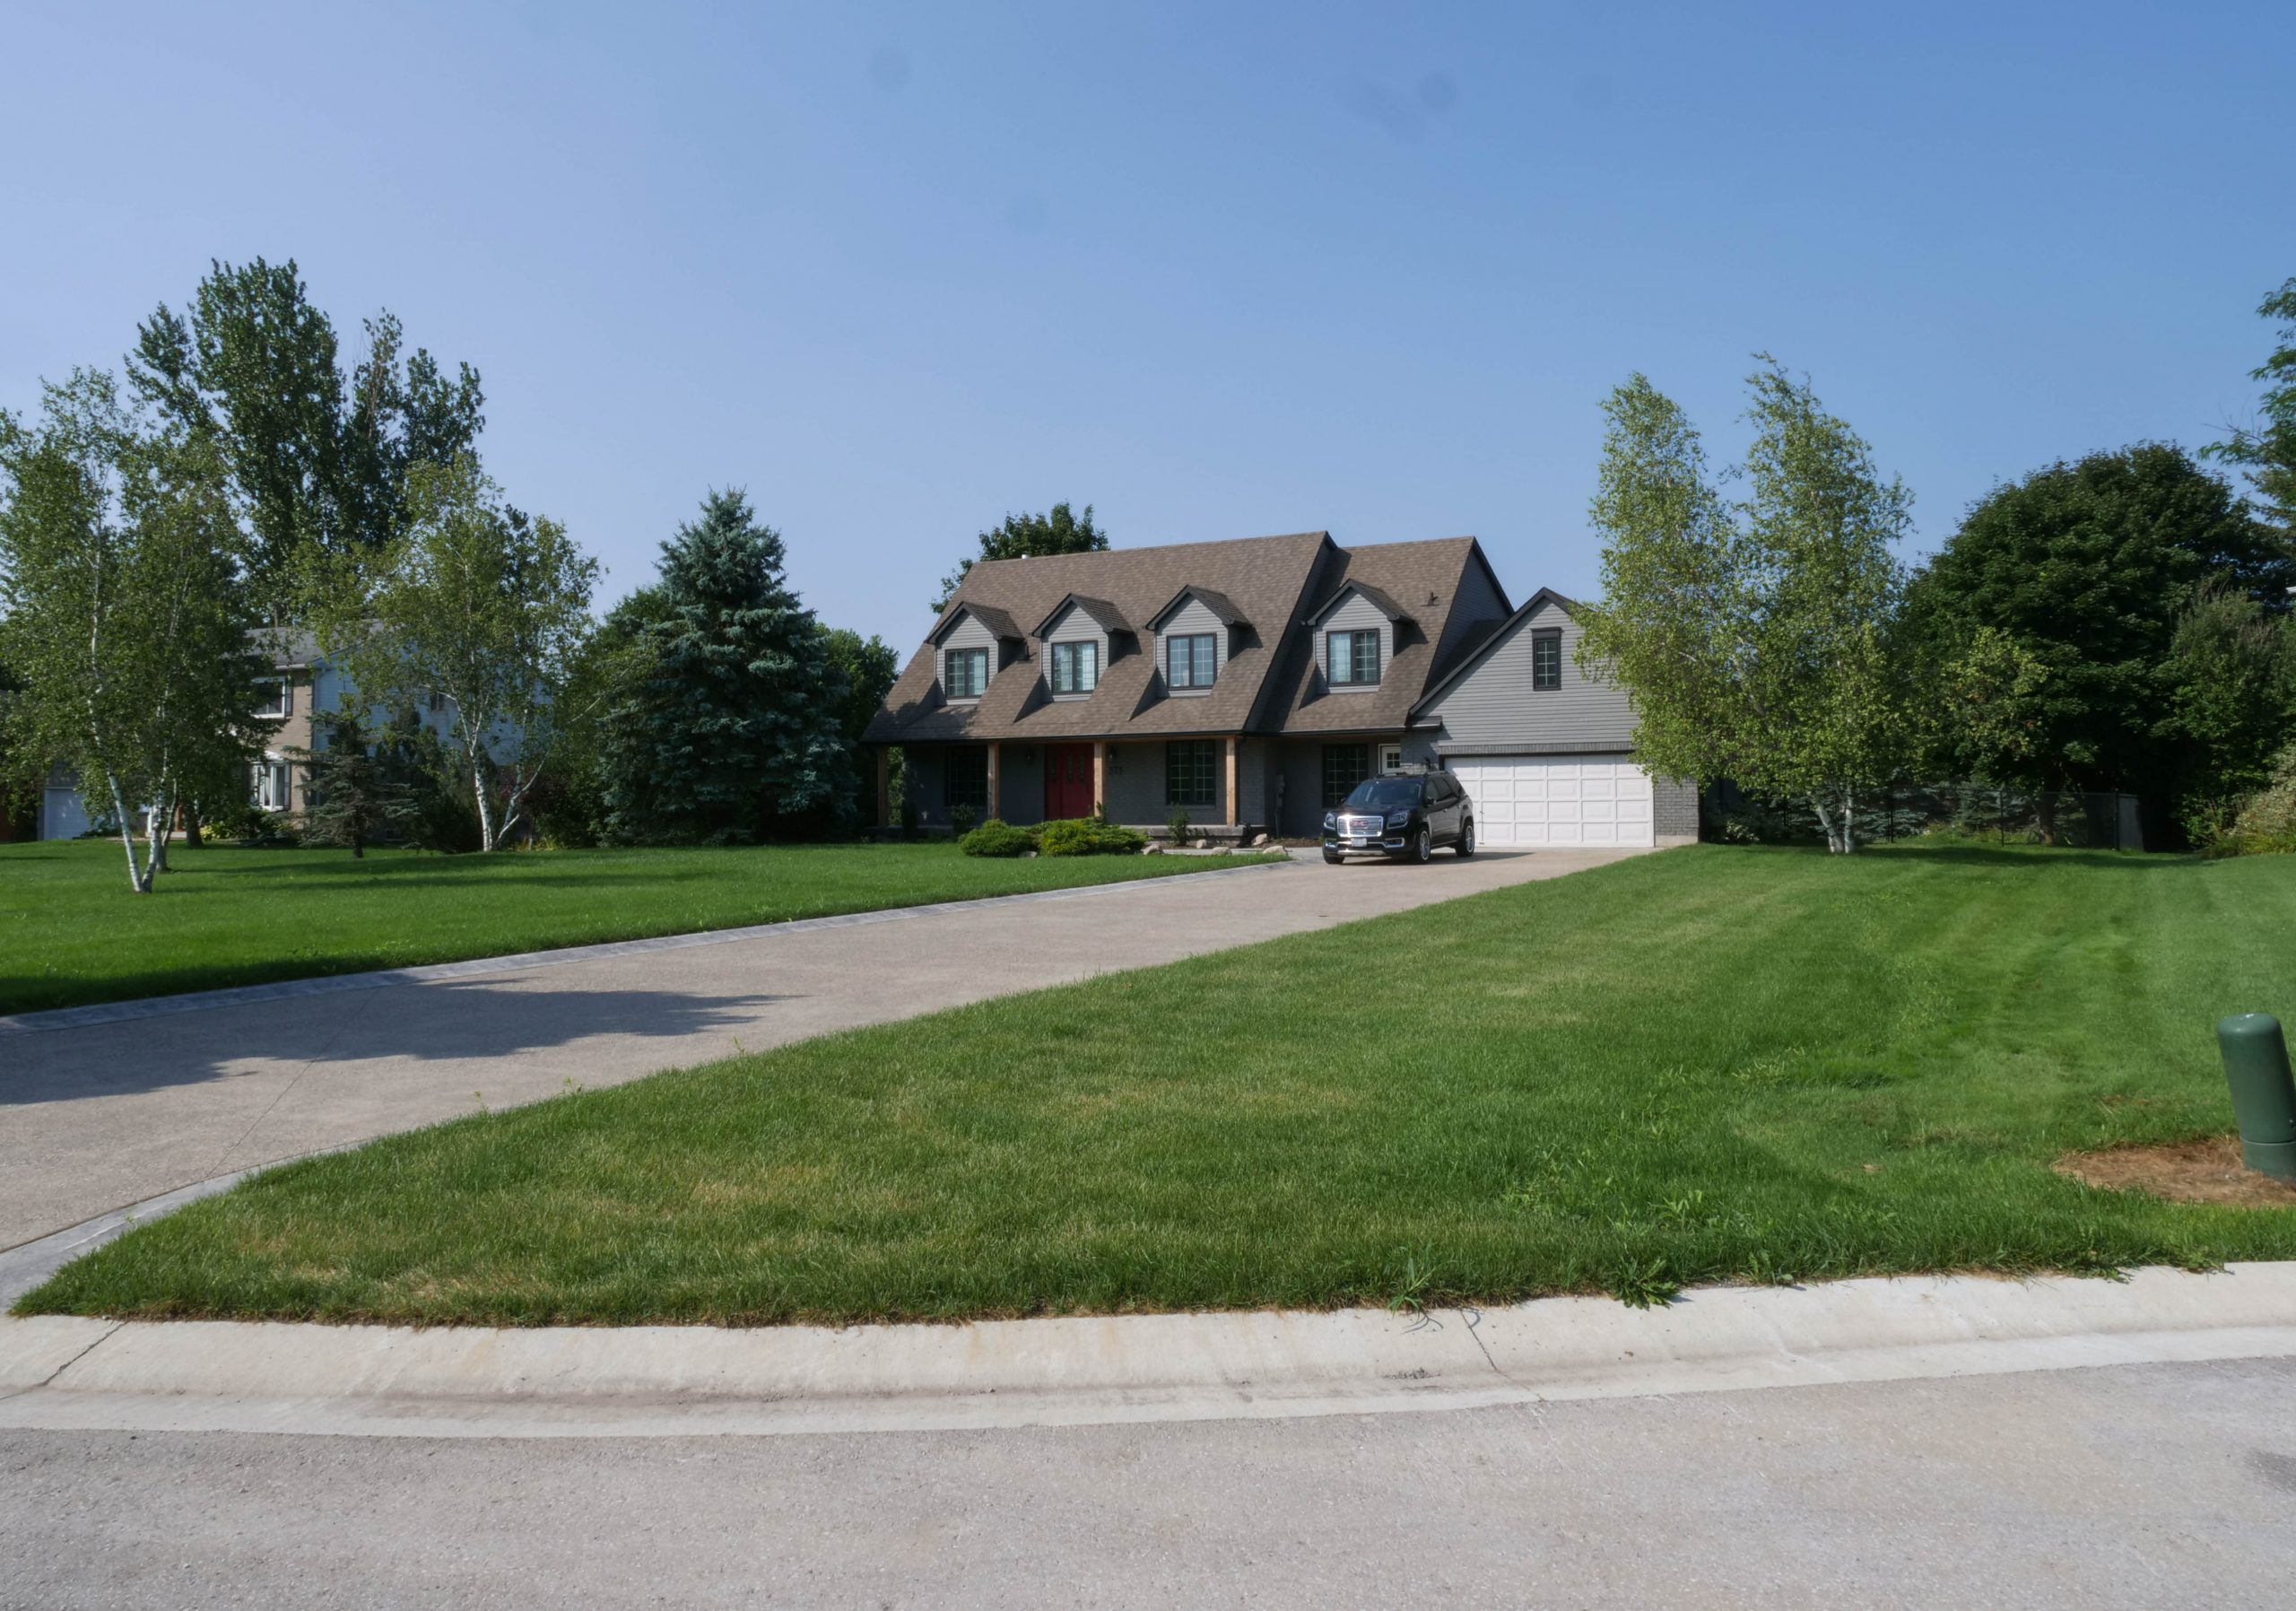 New Lawn Services in East Gwillimbury, ONT - After